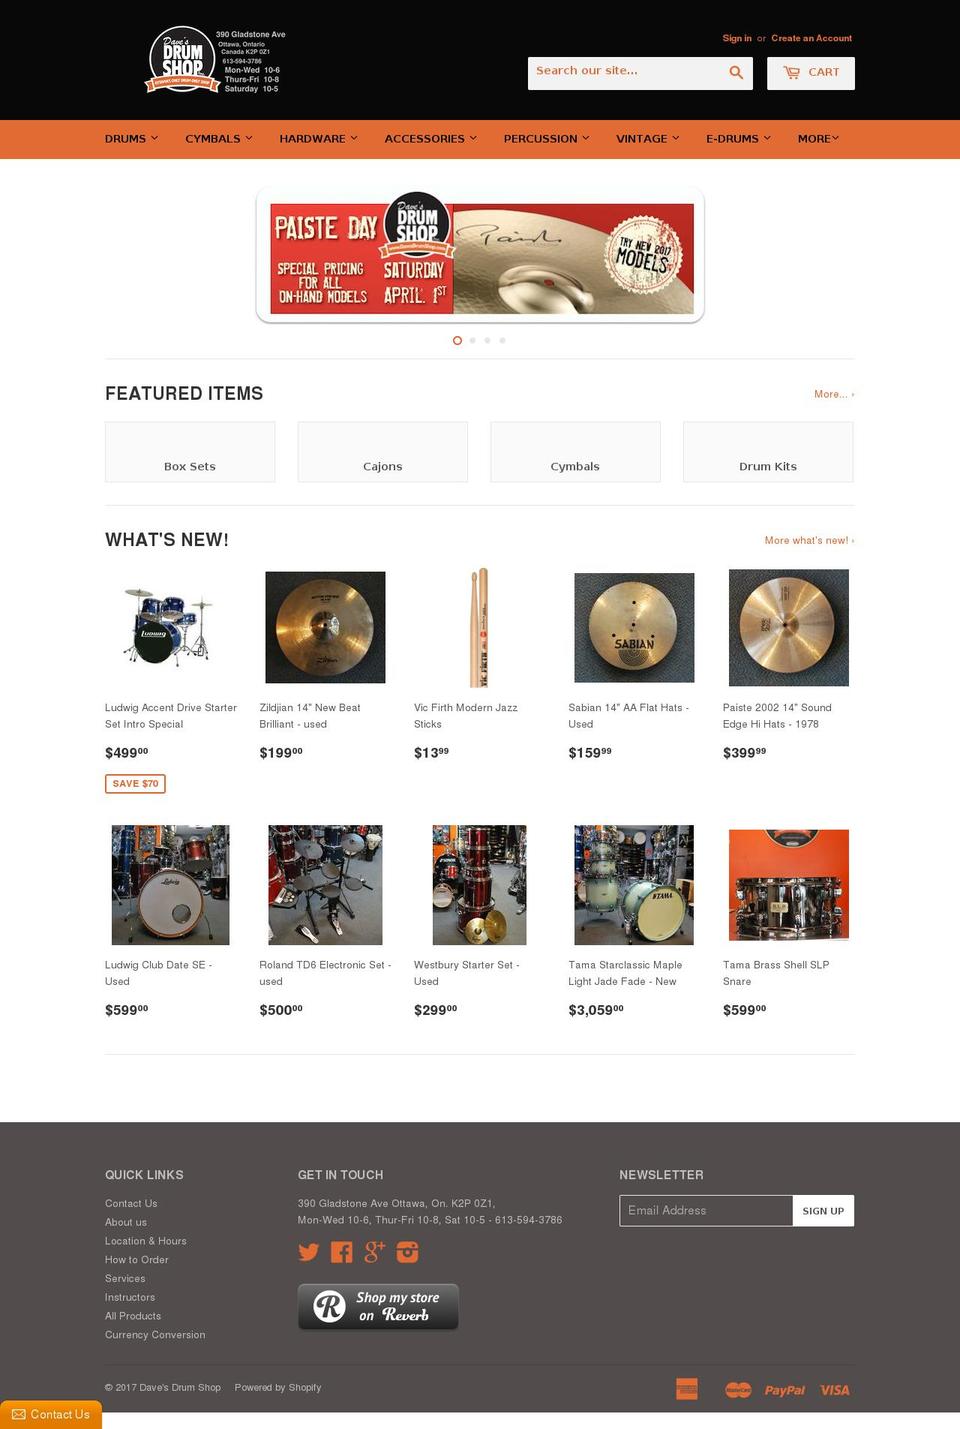 Boost Shopify theme site example davesdrumshop.com